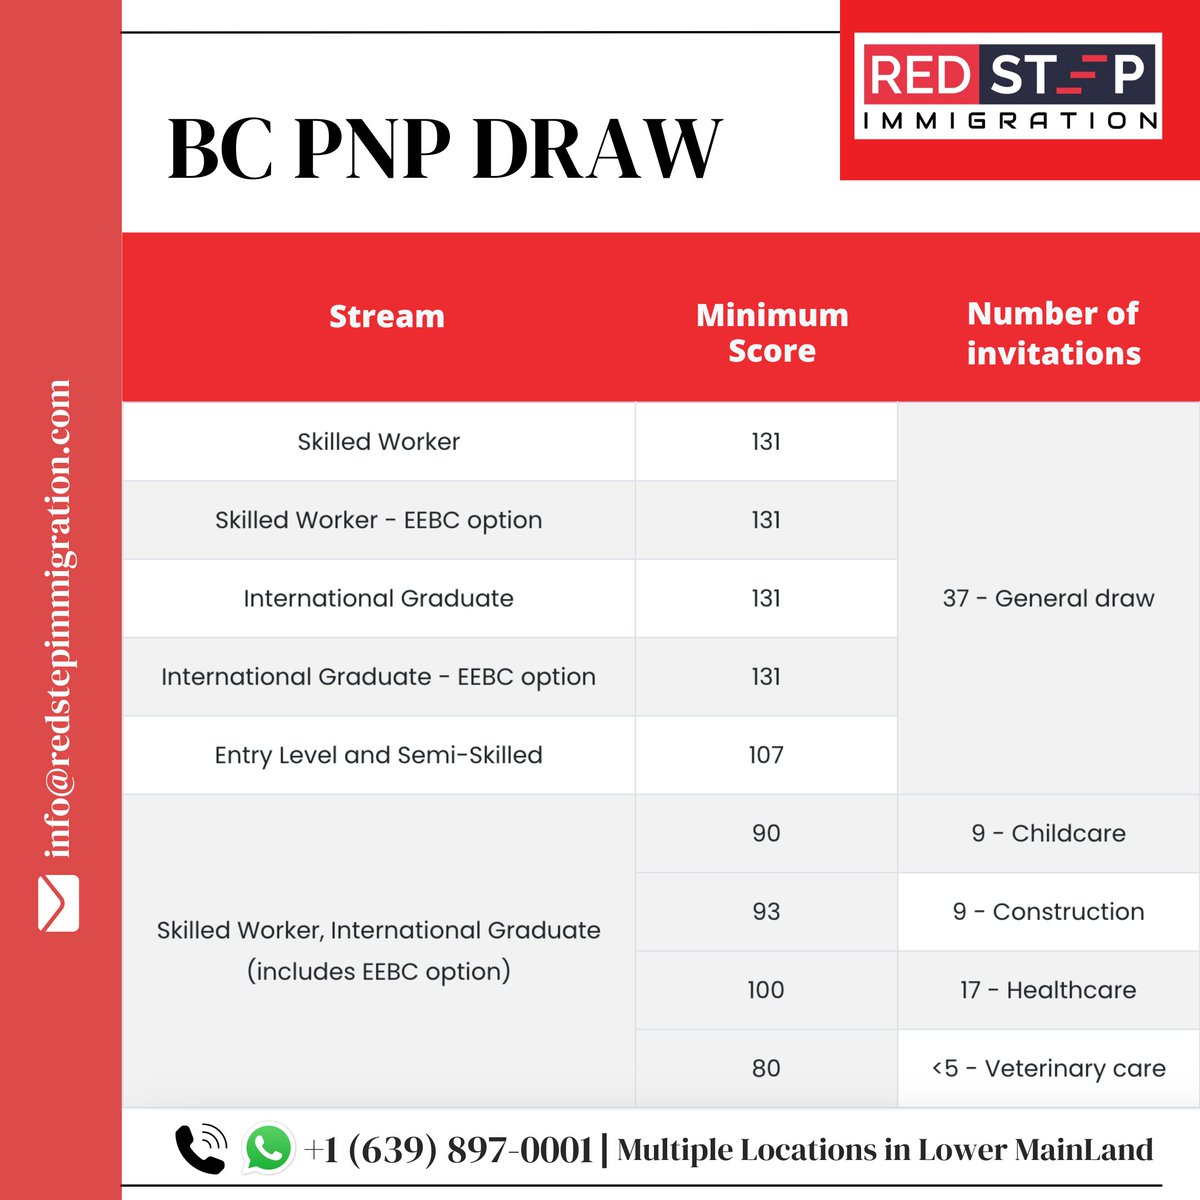 Exciting news! 🌟 The latest BCPNP updates are here. Stay tuned to see how these changes can benefit your immigration journey with Redstep Immigration. 🇨🇦
.
.
#BCPNP #ImmigrationUpdate #RedstepImmigration #Canada #homemaker #StudyVisa #expressentry #workvisa